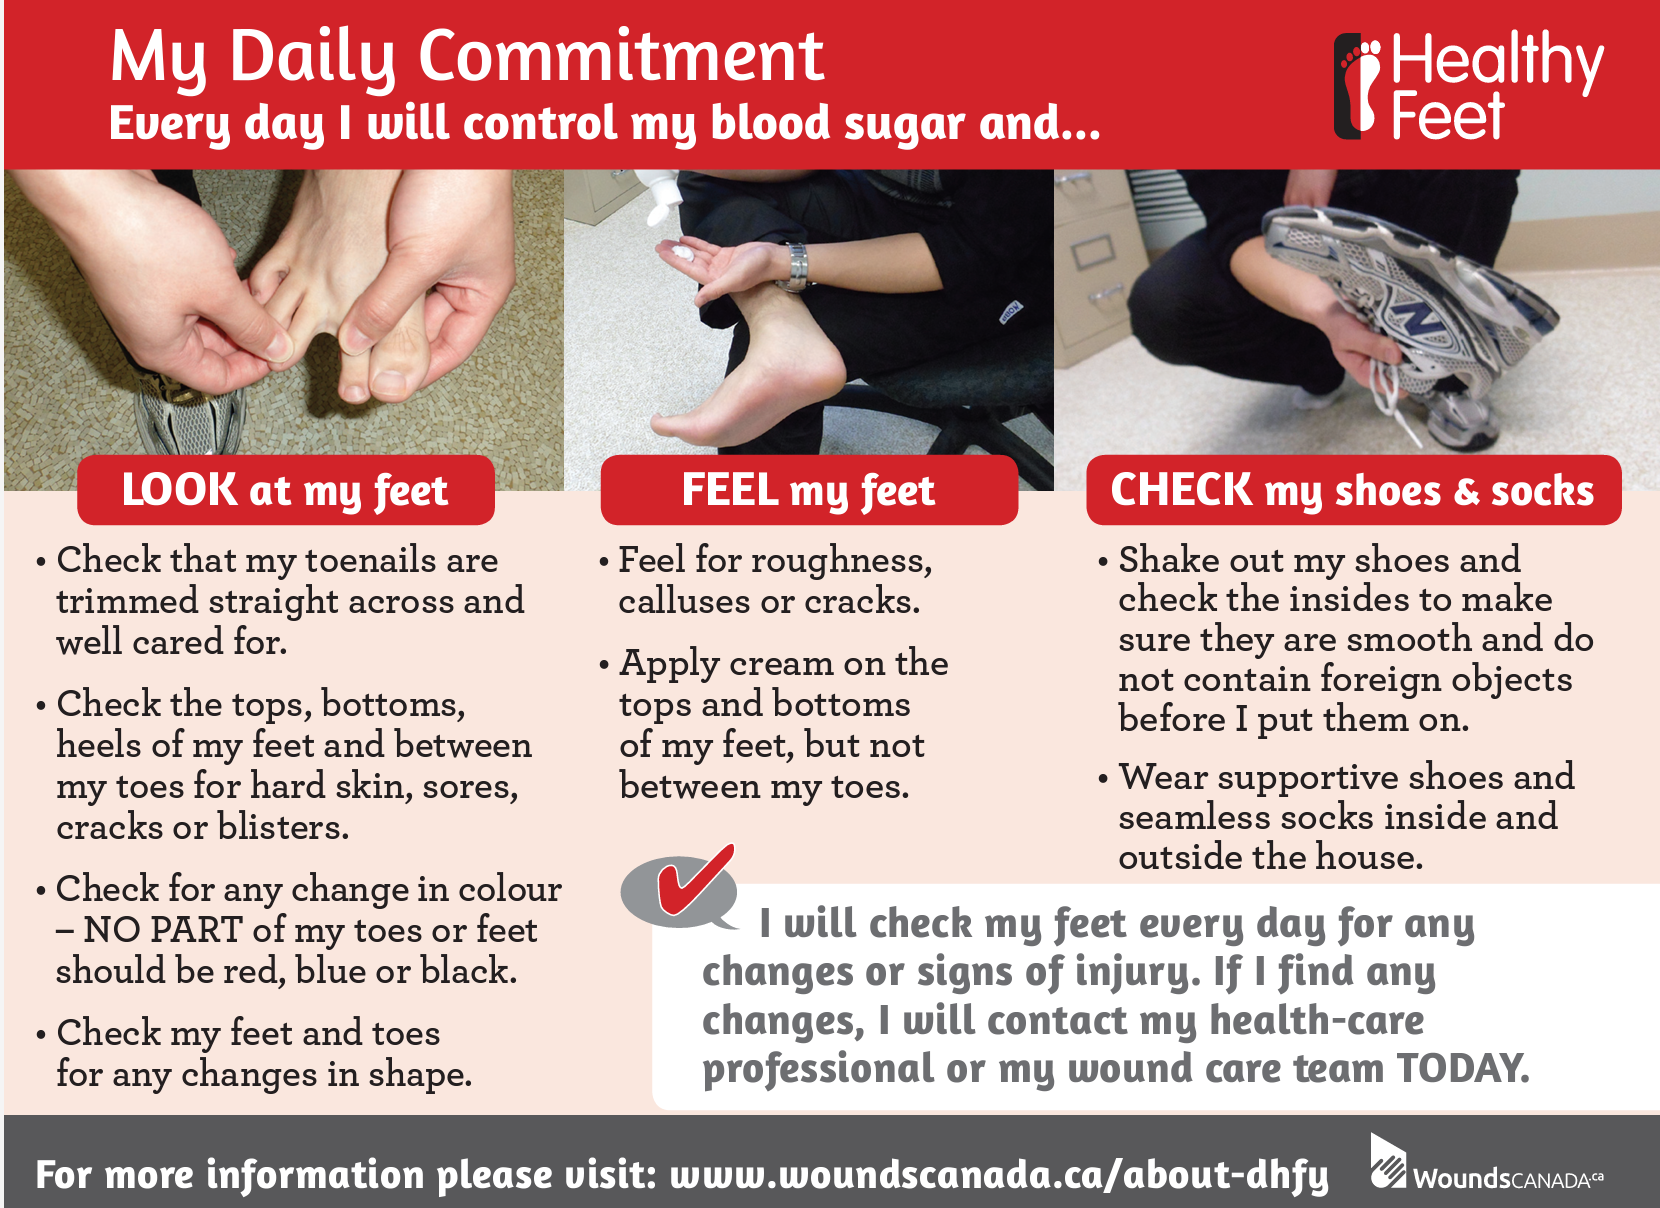 PEP Talk Daily Commitment Reference Card